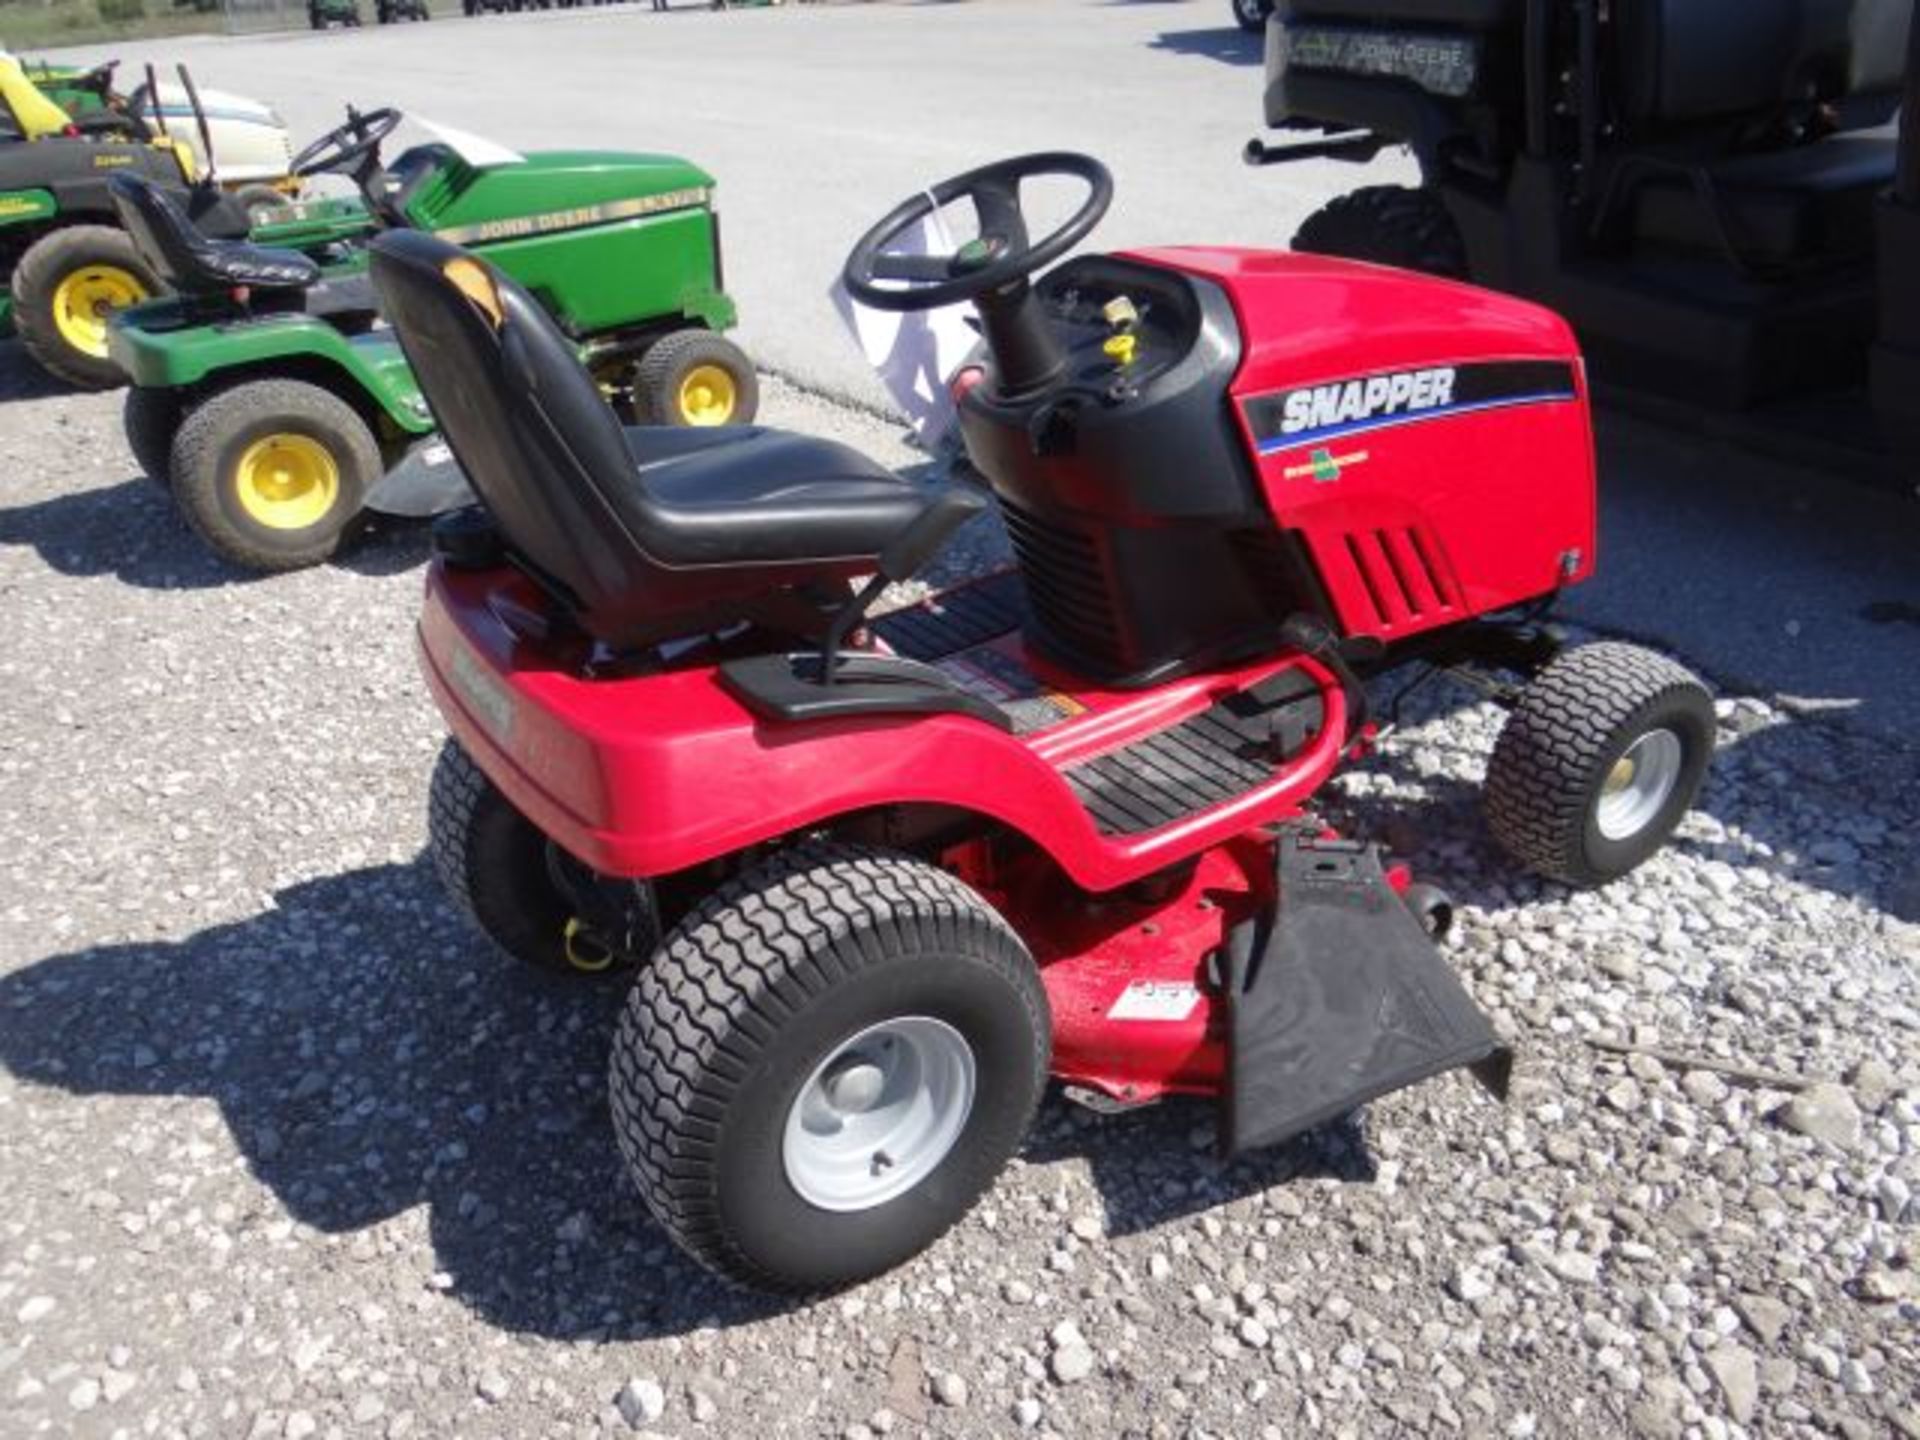 Lot 90831 - 2008 Snapper LT2042 Mower 532 hrs, 20hp, Briggs, Air Cooled, Hydro, 42" Deck, - Image 3 of 4